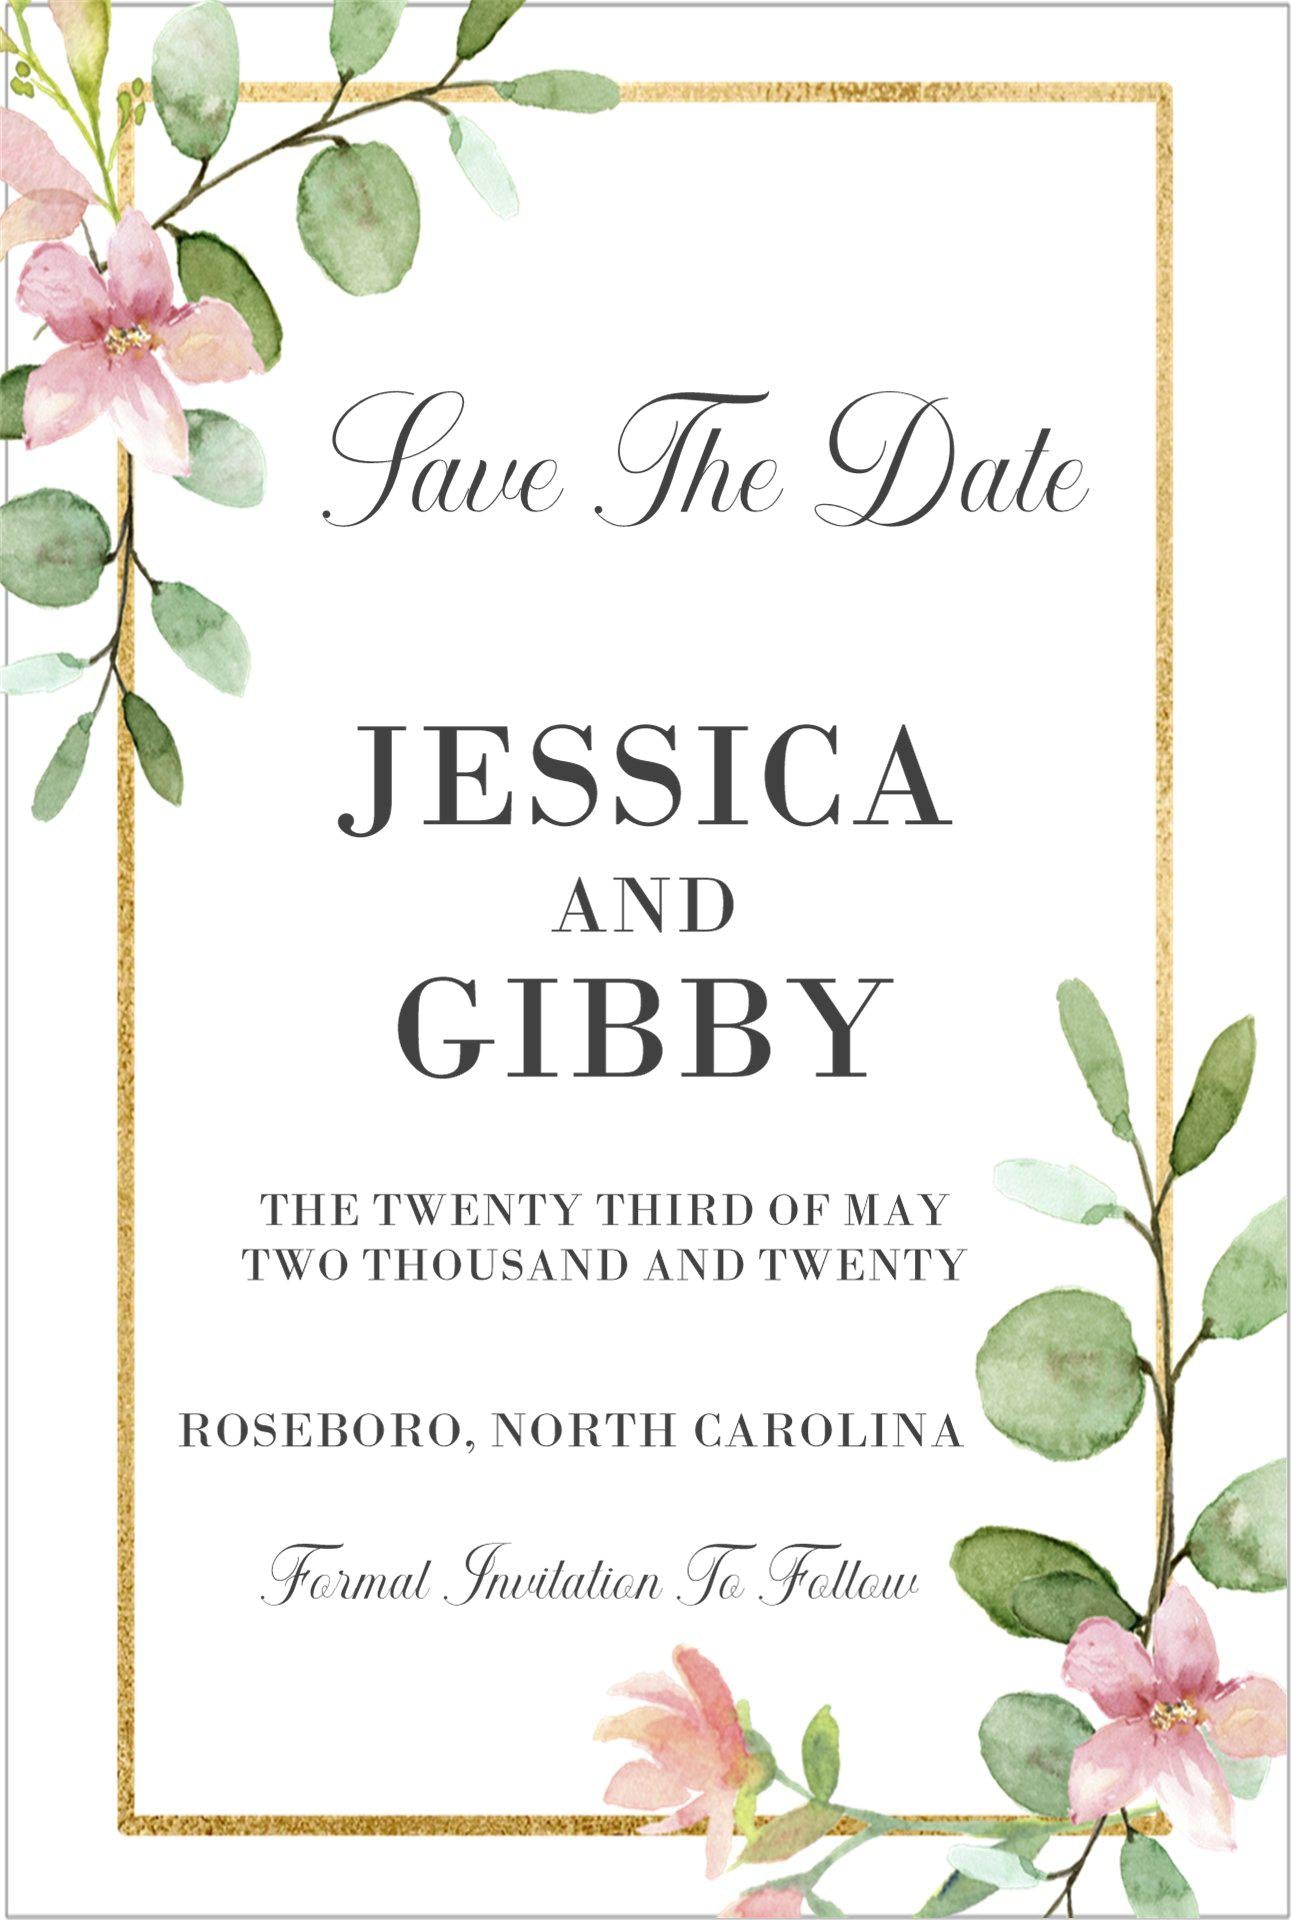 Pink And Gold Wedding Save The Date Cards